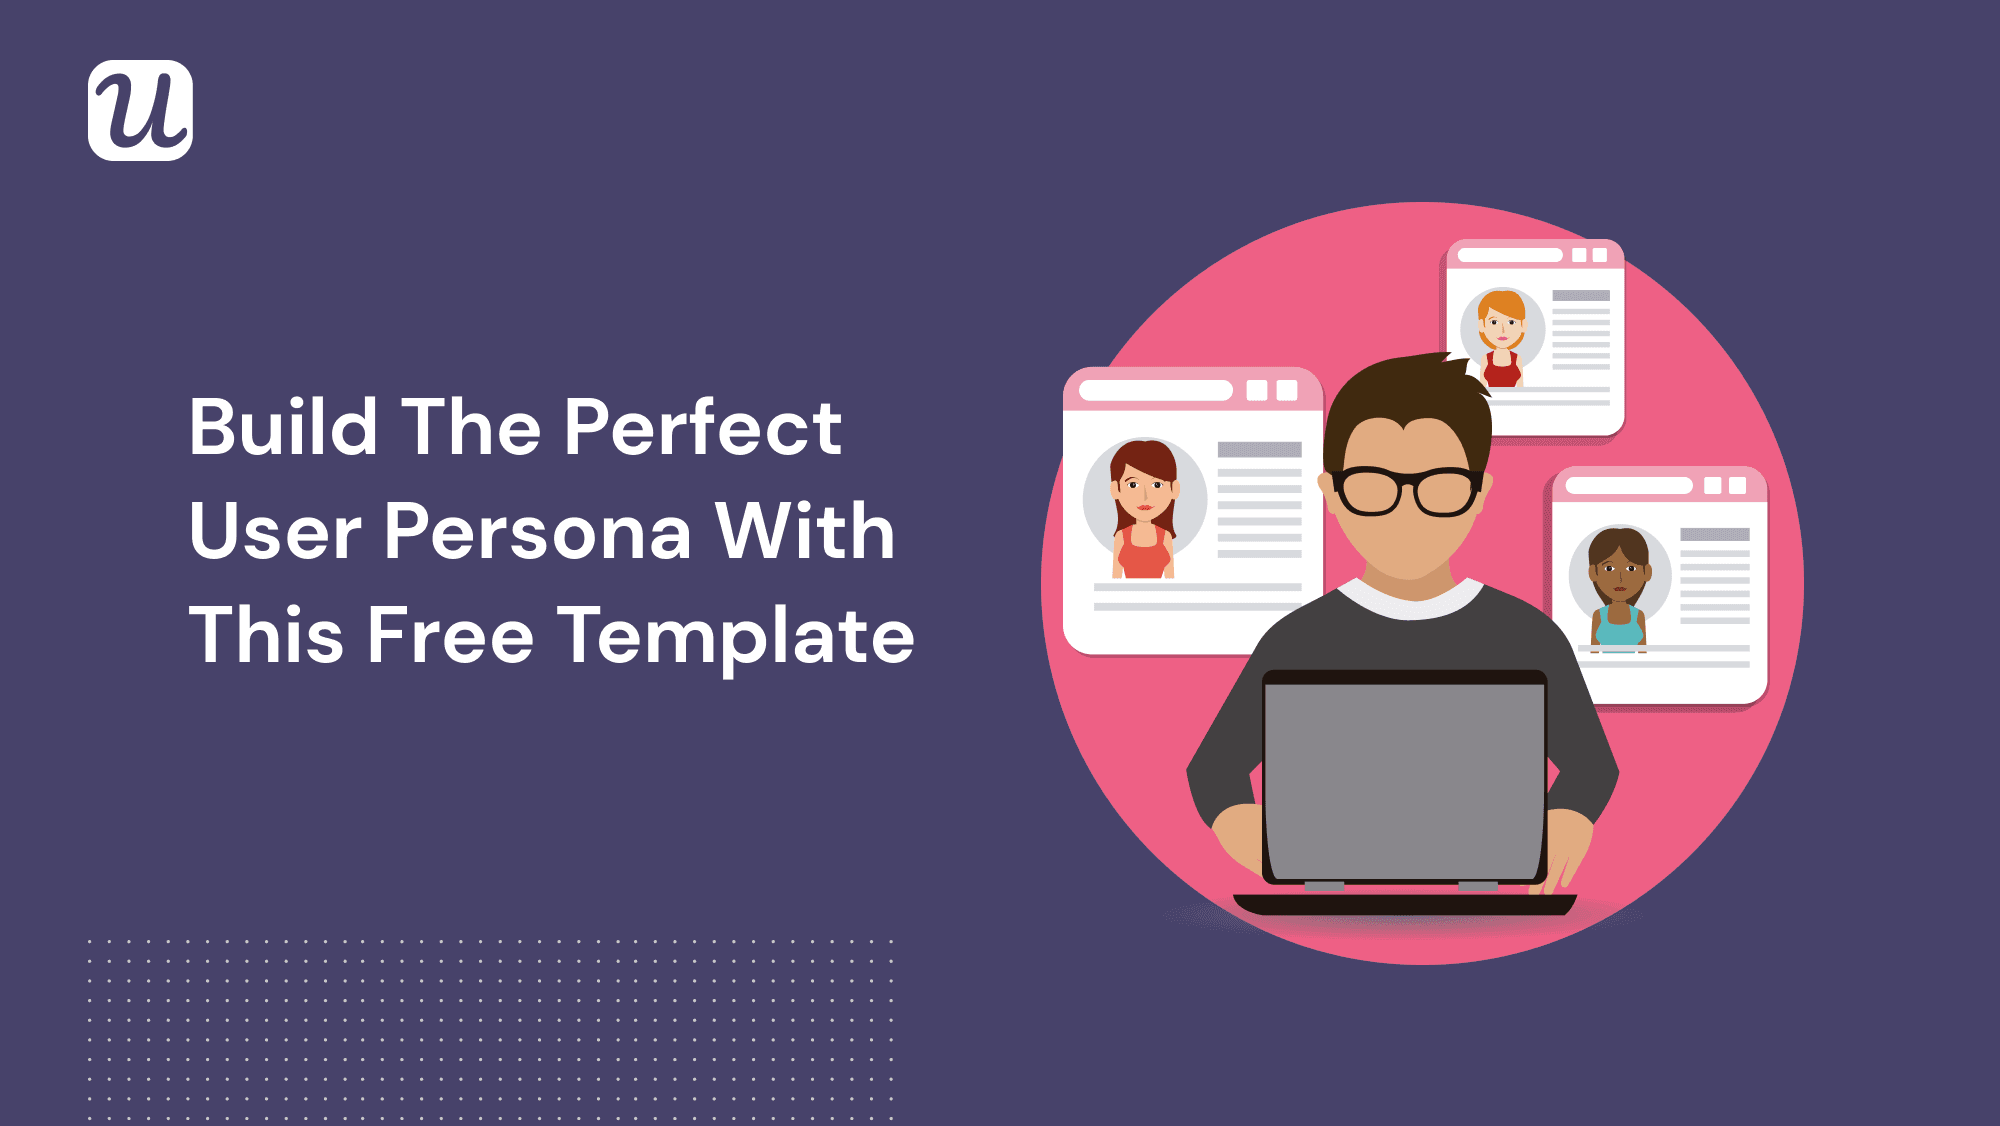 Free User Persona Template for SaaS - The Fastest Way to Create User Persona for Your SaaS Business